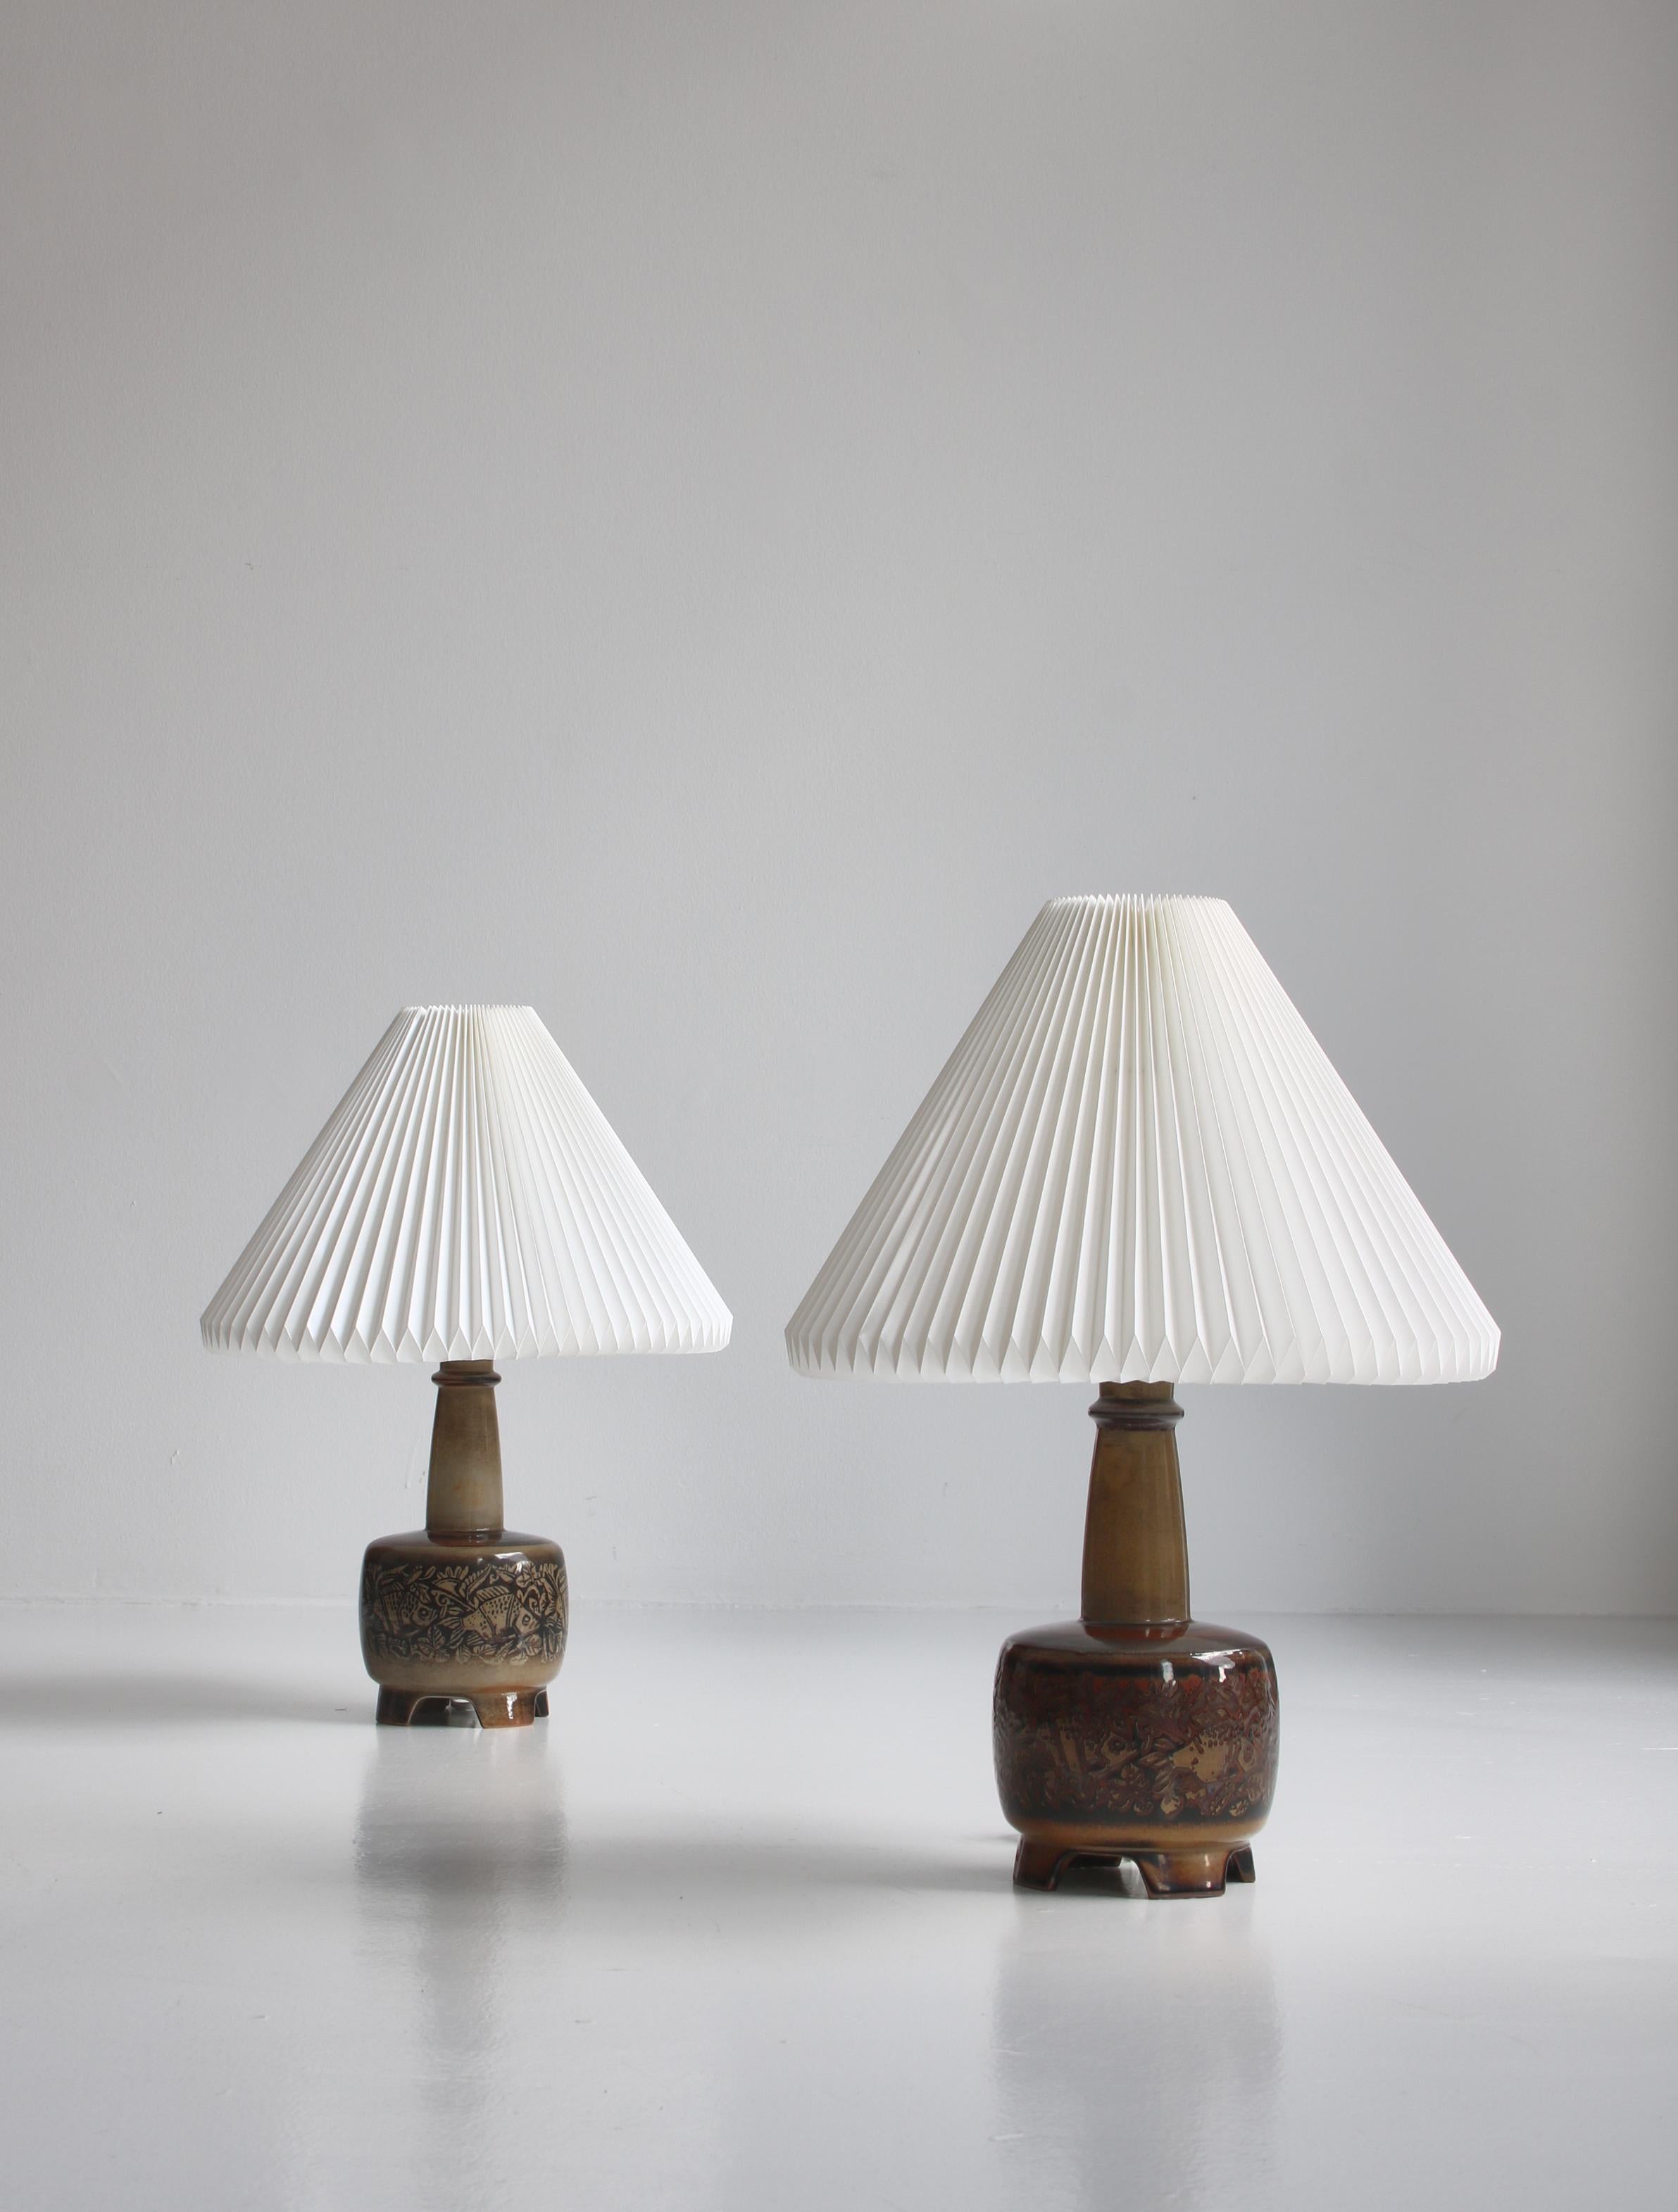 Wonderful pair of hand made ceramic table lamps made by Nils Thorsson for Royal Copenhagen in the 1950s. The table bases are decorated with fish motifs and a glazing in earth colors. Mounted with new white hand folded Le Klint shades. Rewired and